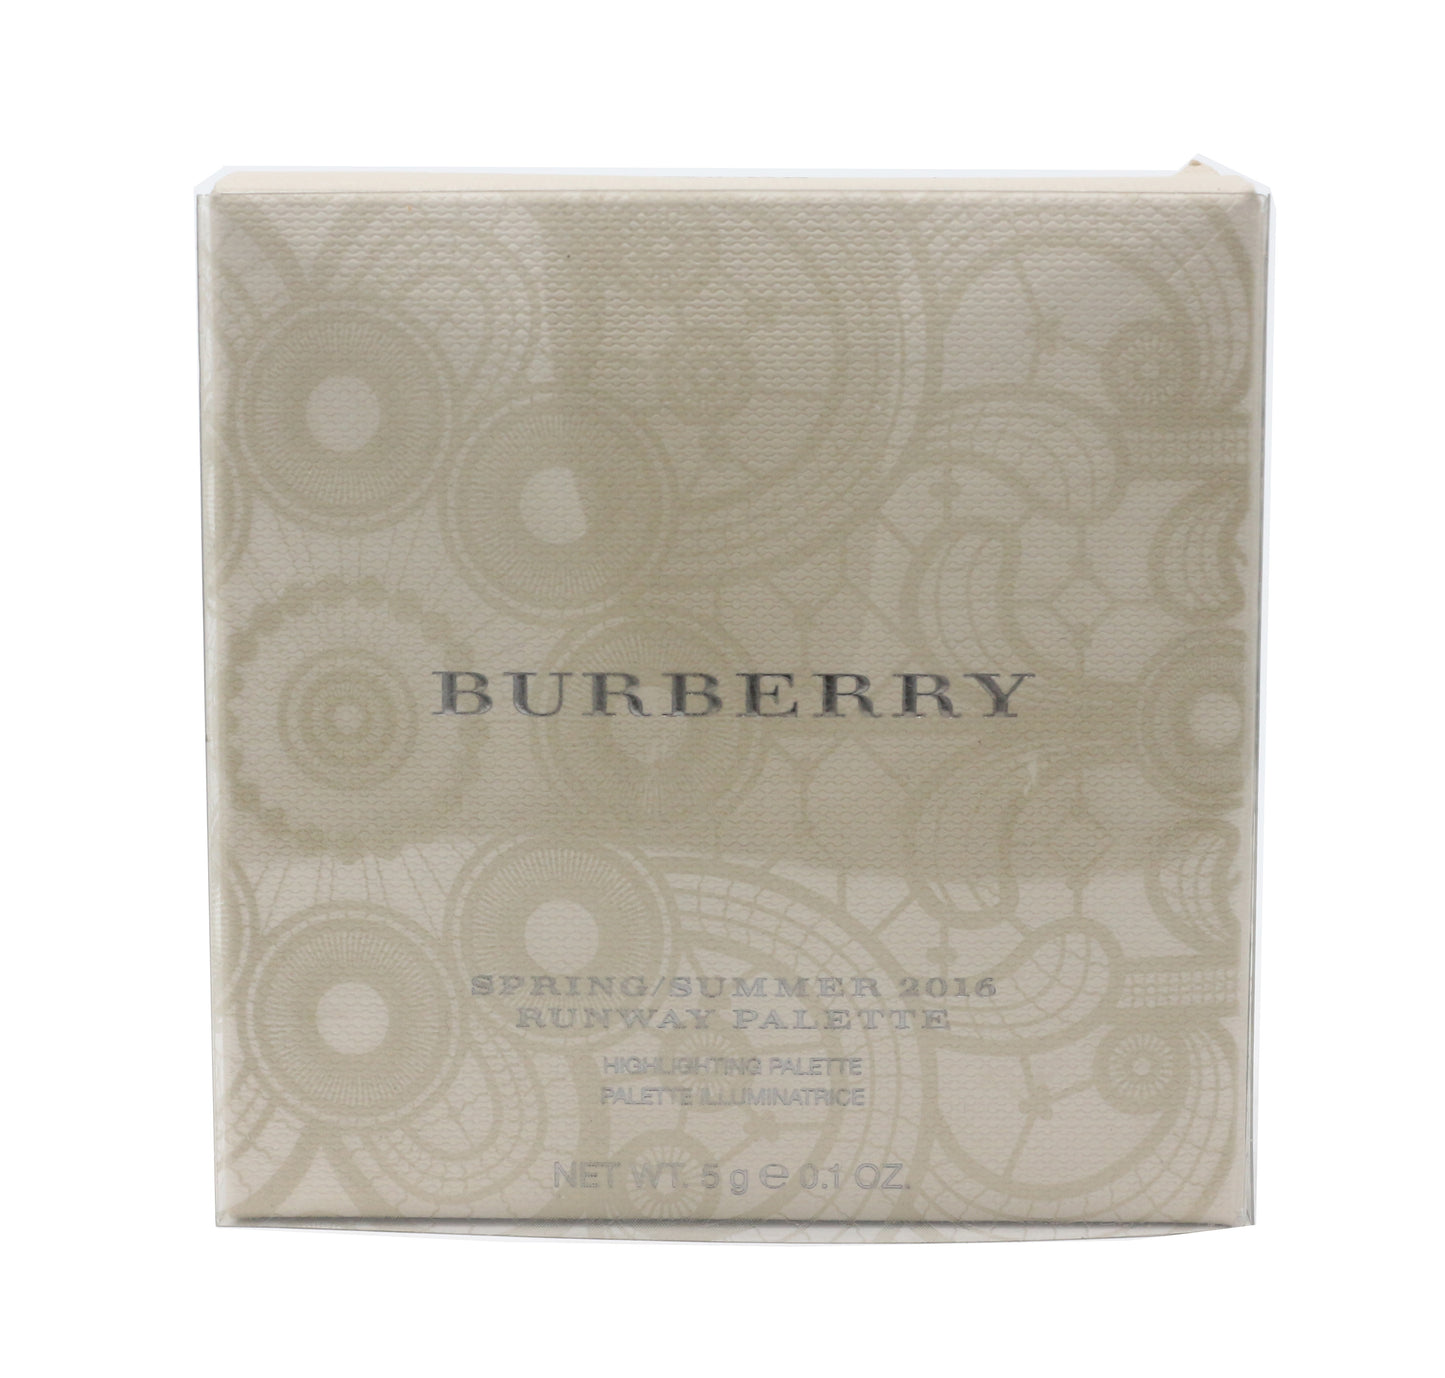 Burberry Spring Summer 2016 Runway Palette 0.1oz New In Box(Choose Your Shade)